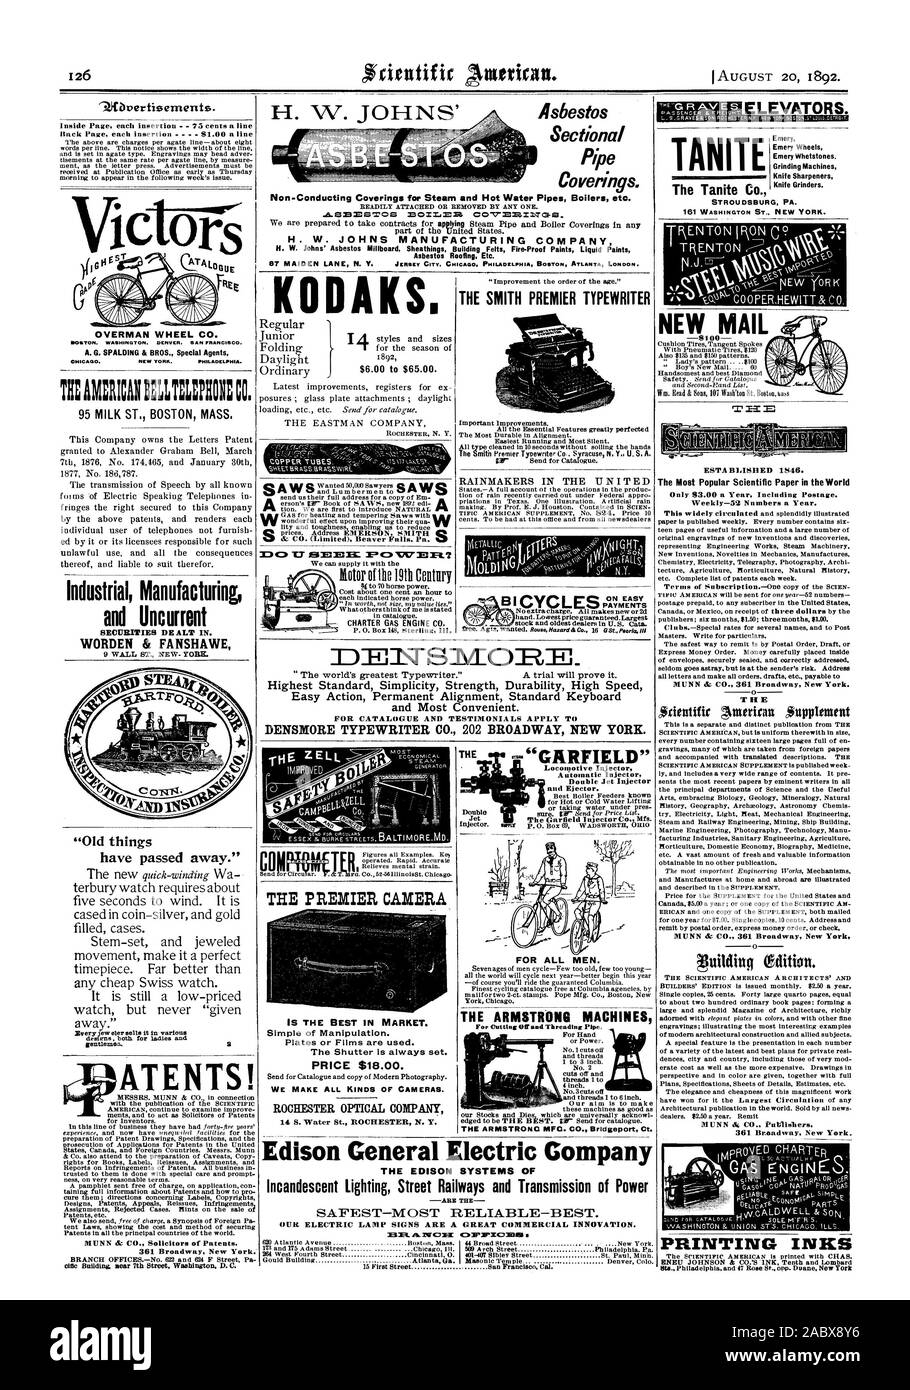 Sectional Pipe Coverings. Non-Conducting Coverings for Steam and Hot Water Pipes Boilers etc. H. W. JOHNS MANUFACTURING COMPANY Asbestos Roofing Etc. KODAKS. CHARTER GAS ENGINE CO. THE SMITH PREMIER TYPEWRITER RAINMAKERS IN THE UNITED ON EASY PAYMENTS cifr 3:301TS101R= 'Old things ATENTS! TEAMMICAITILLIEPEN: CO. 95 MILK ST BOSTON MASS. Industrial Manufacturing and Uncurrent WORDEN & FANSHAWE '74Jfbverti9ements. OVERMAN WHEEL. CO. HOUTON. WASHINGTON. DENVER. SAN FRANCISCO. A. G. SPALDING & BROS. Special Agents CHICAGO. NEW YORK. PHI A. 'E'G R AV E ELEVATORS. Emery Wheels Emery Whetstones Stock Photo